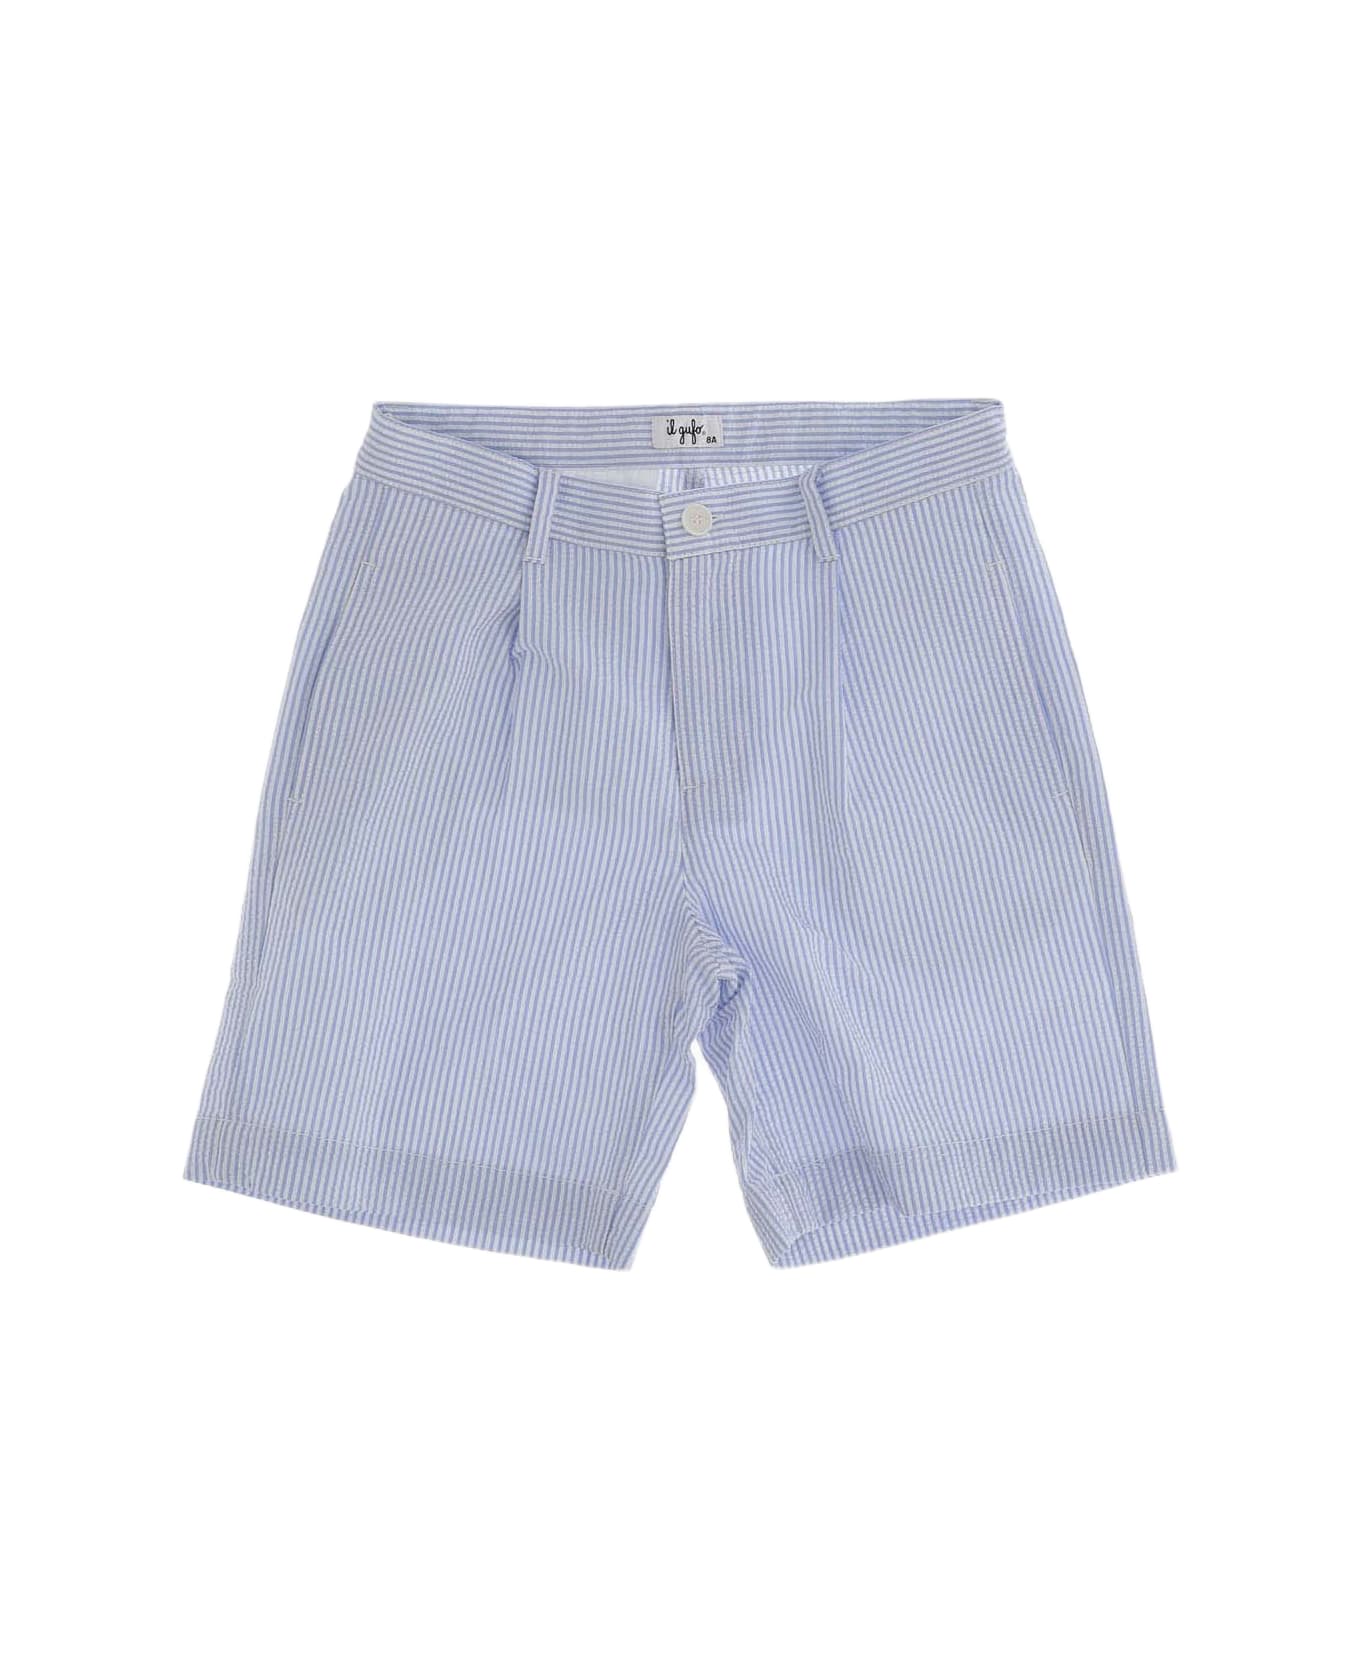 Il Gufo Cotton Short Pants With Striped Pattern - Clear Blue